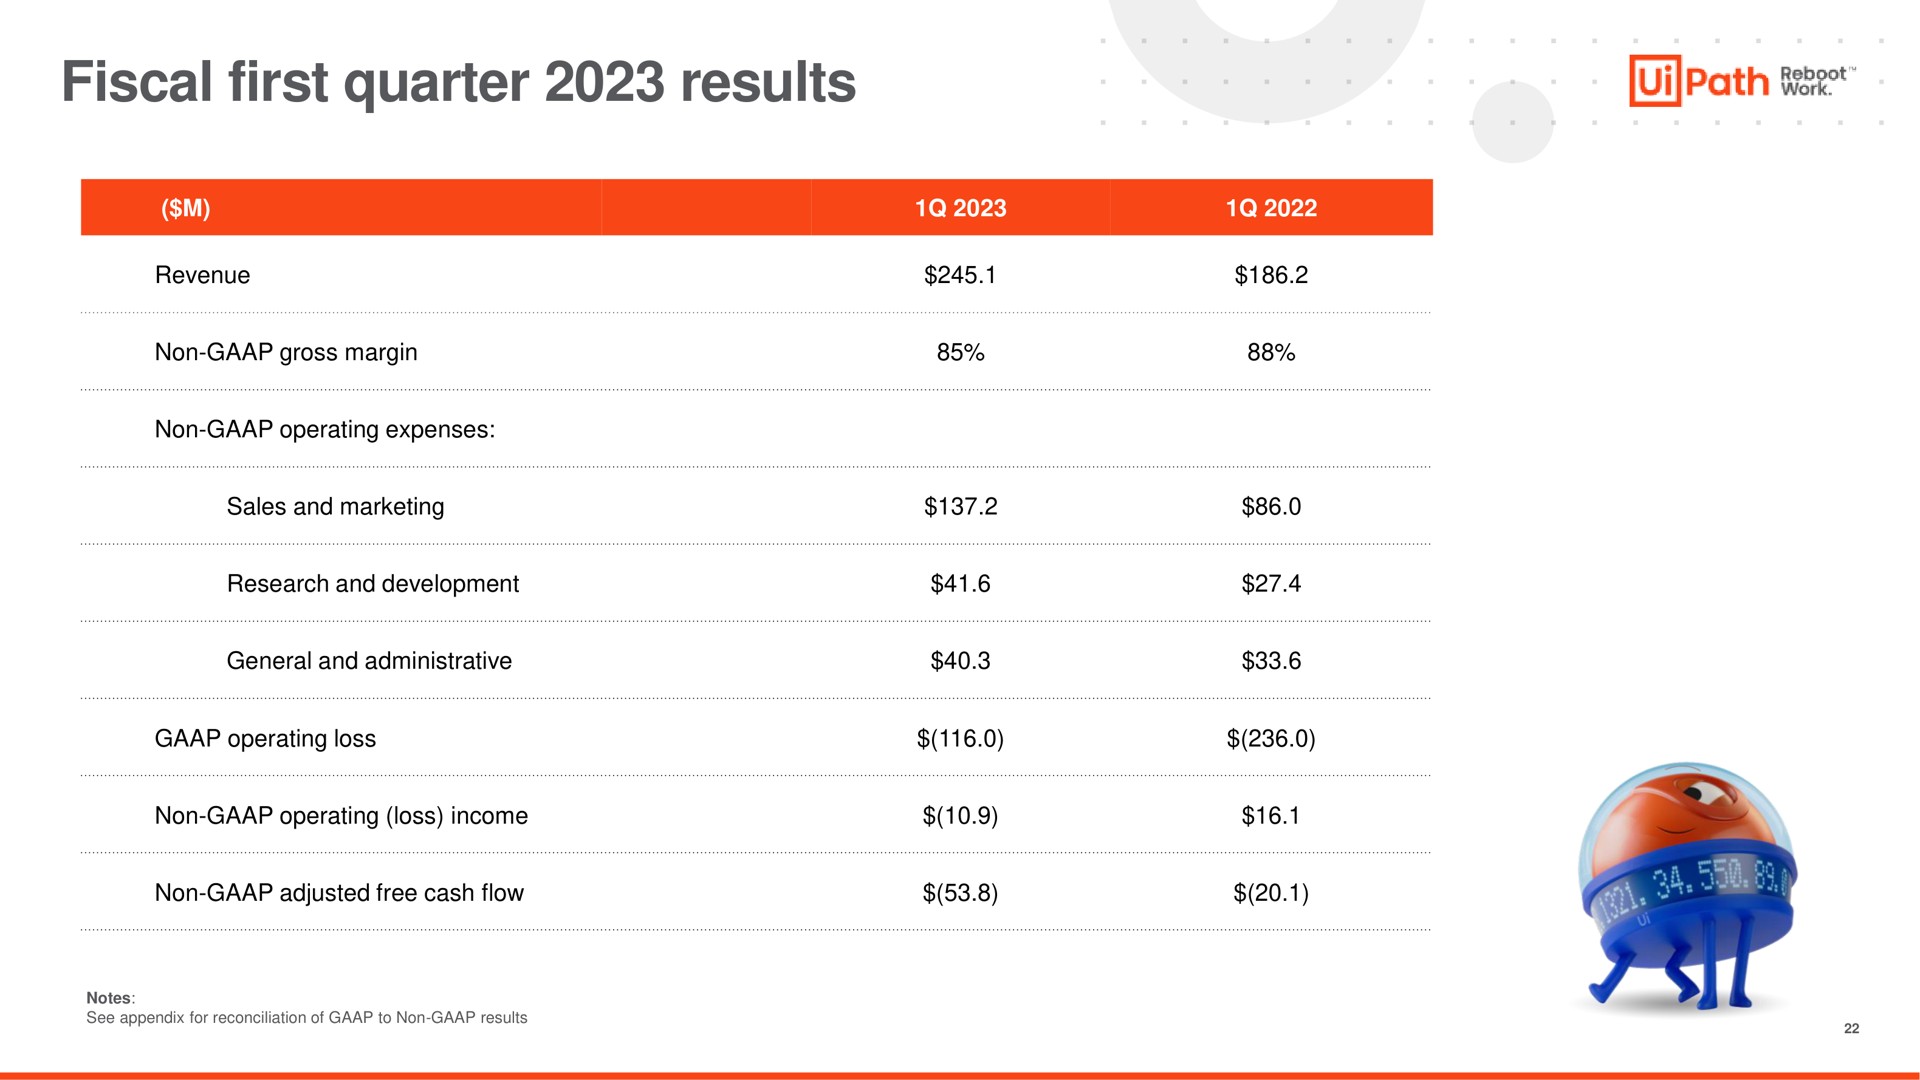 fiscal first quarter results path | UiPath